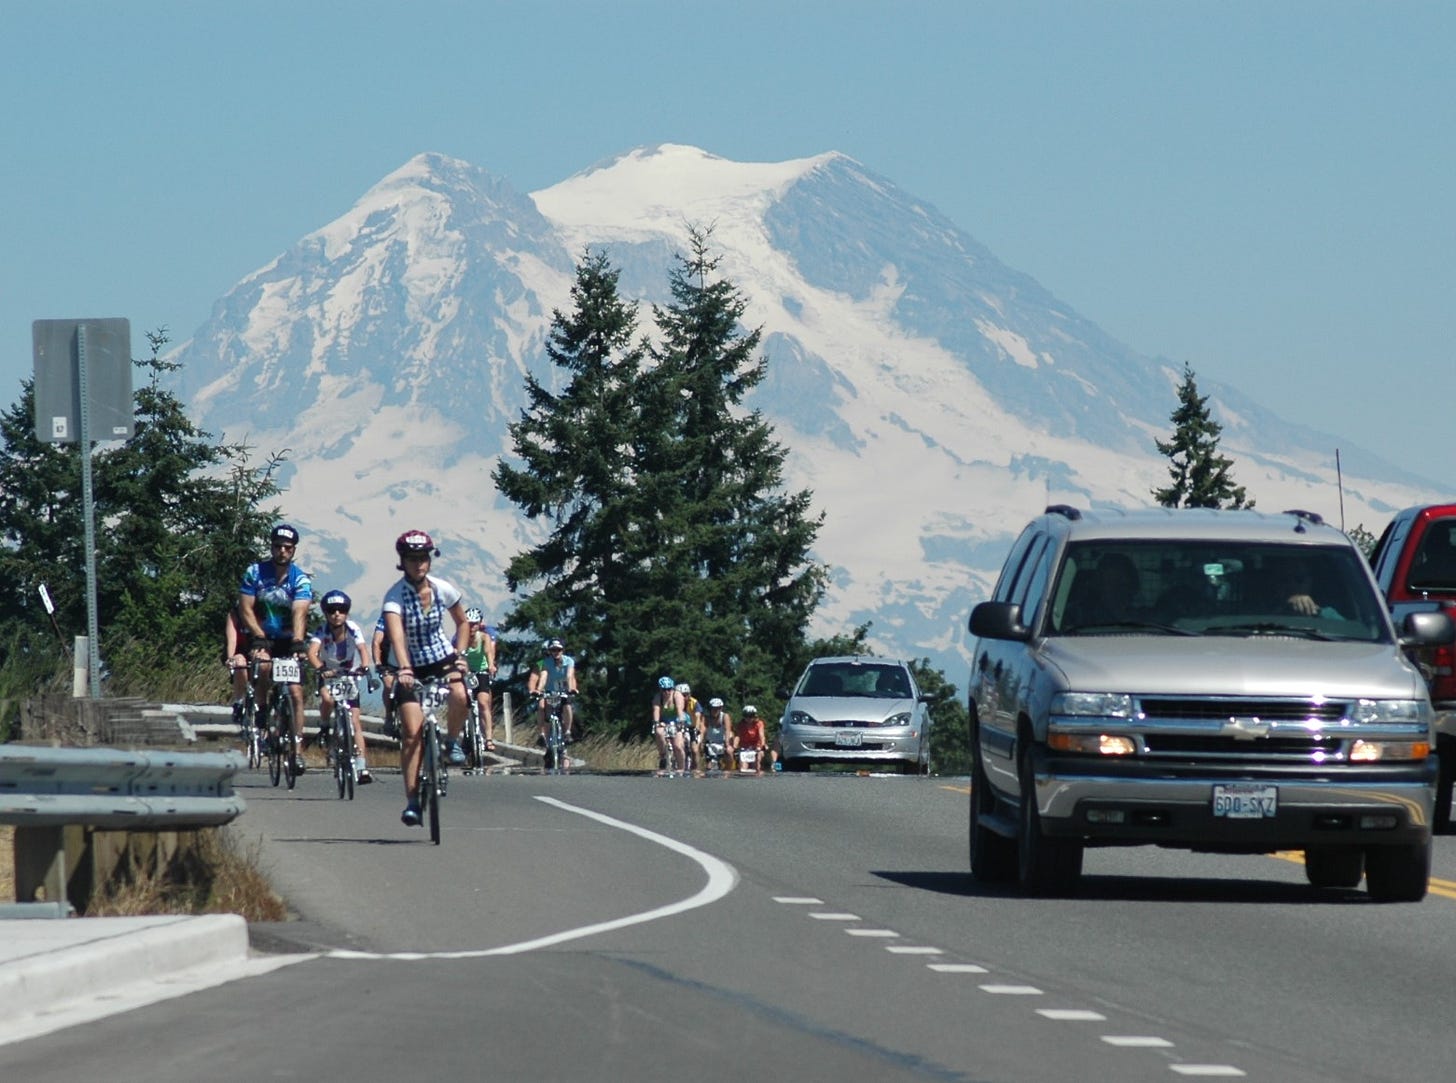 Bicycling on a highway edge with Mount Rainier behind.